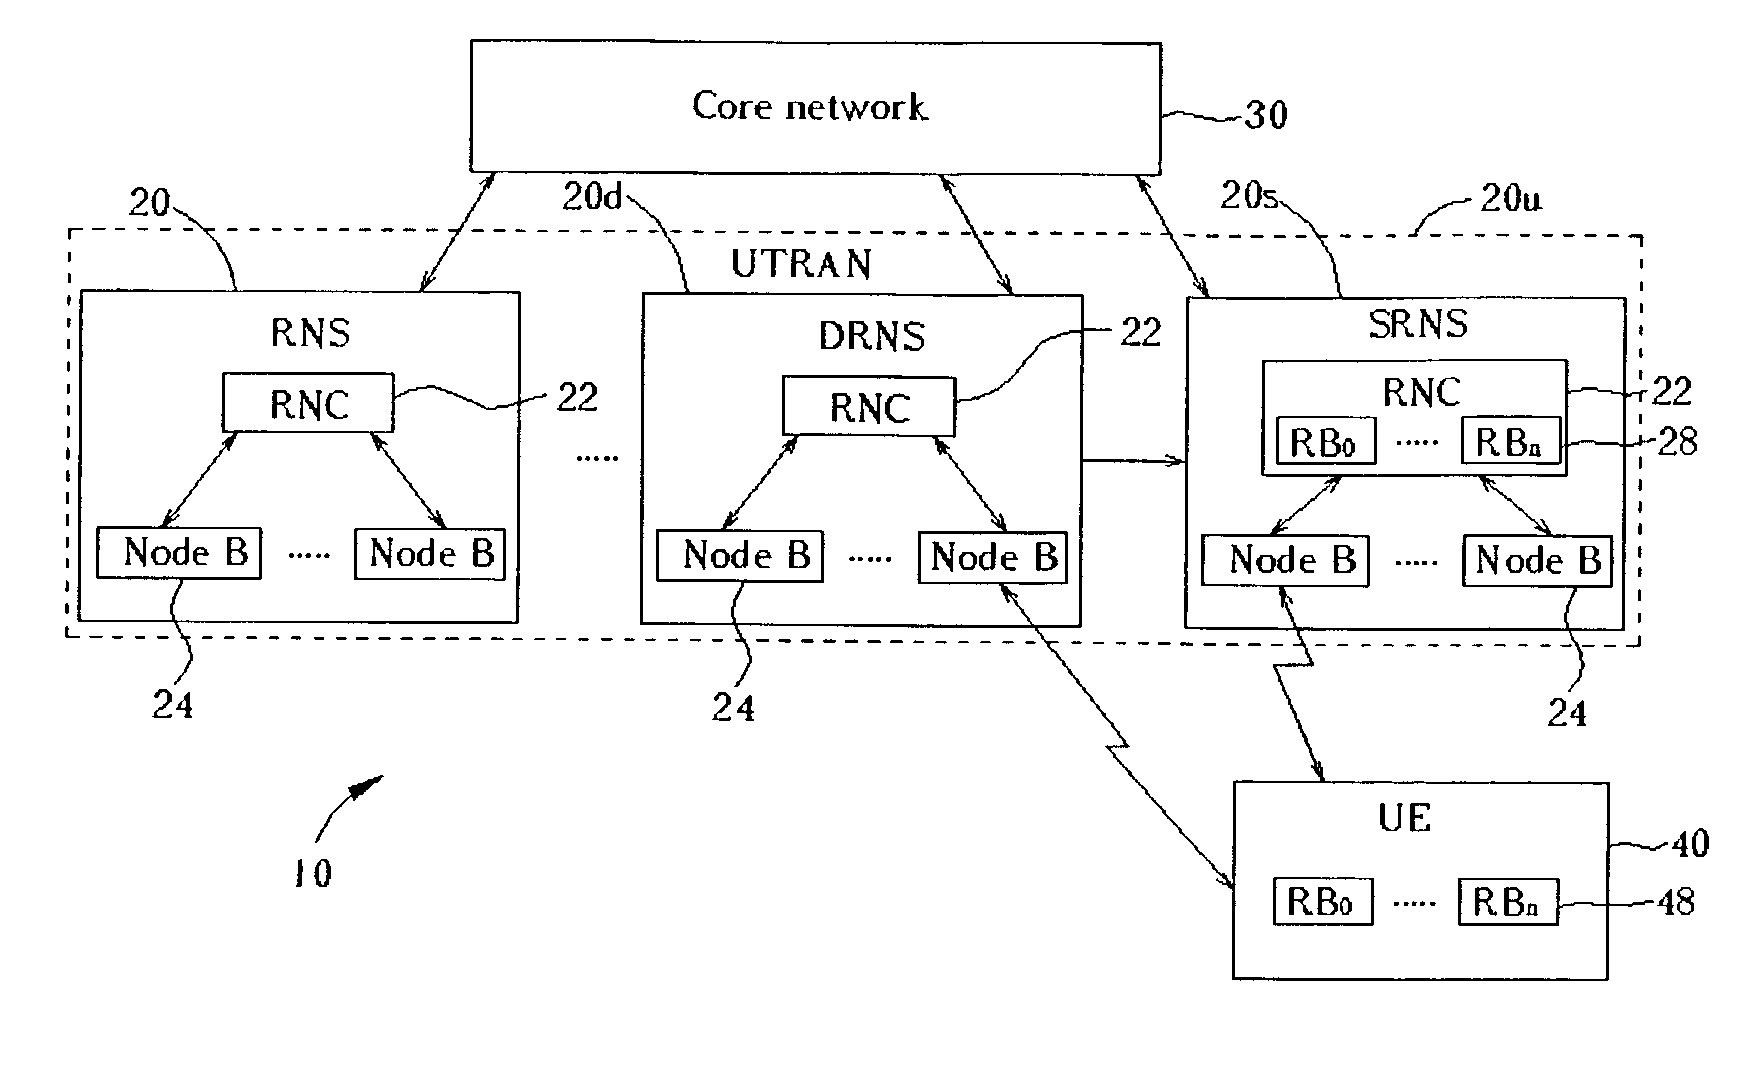 Penalty of cell reselection for a wireless device